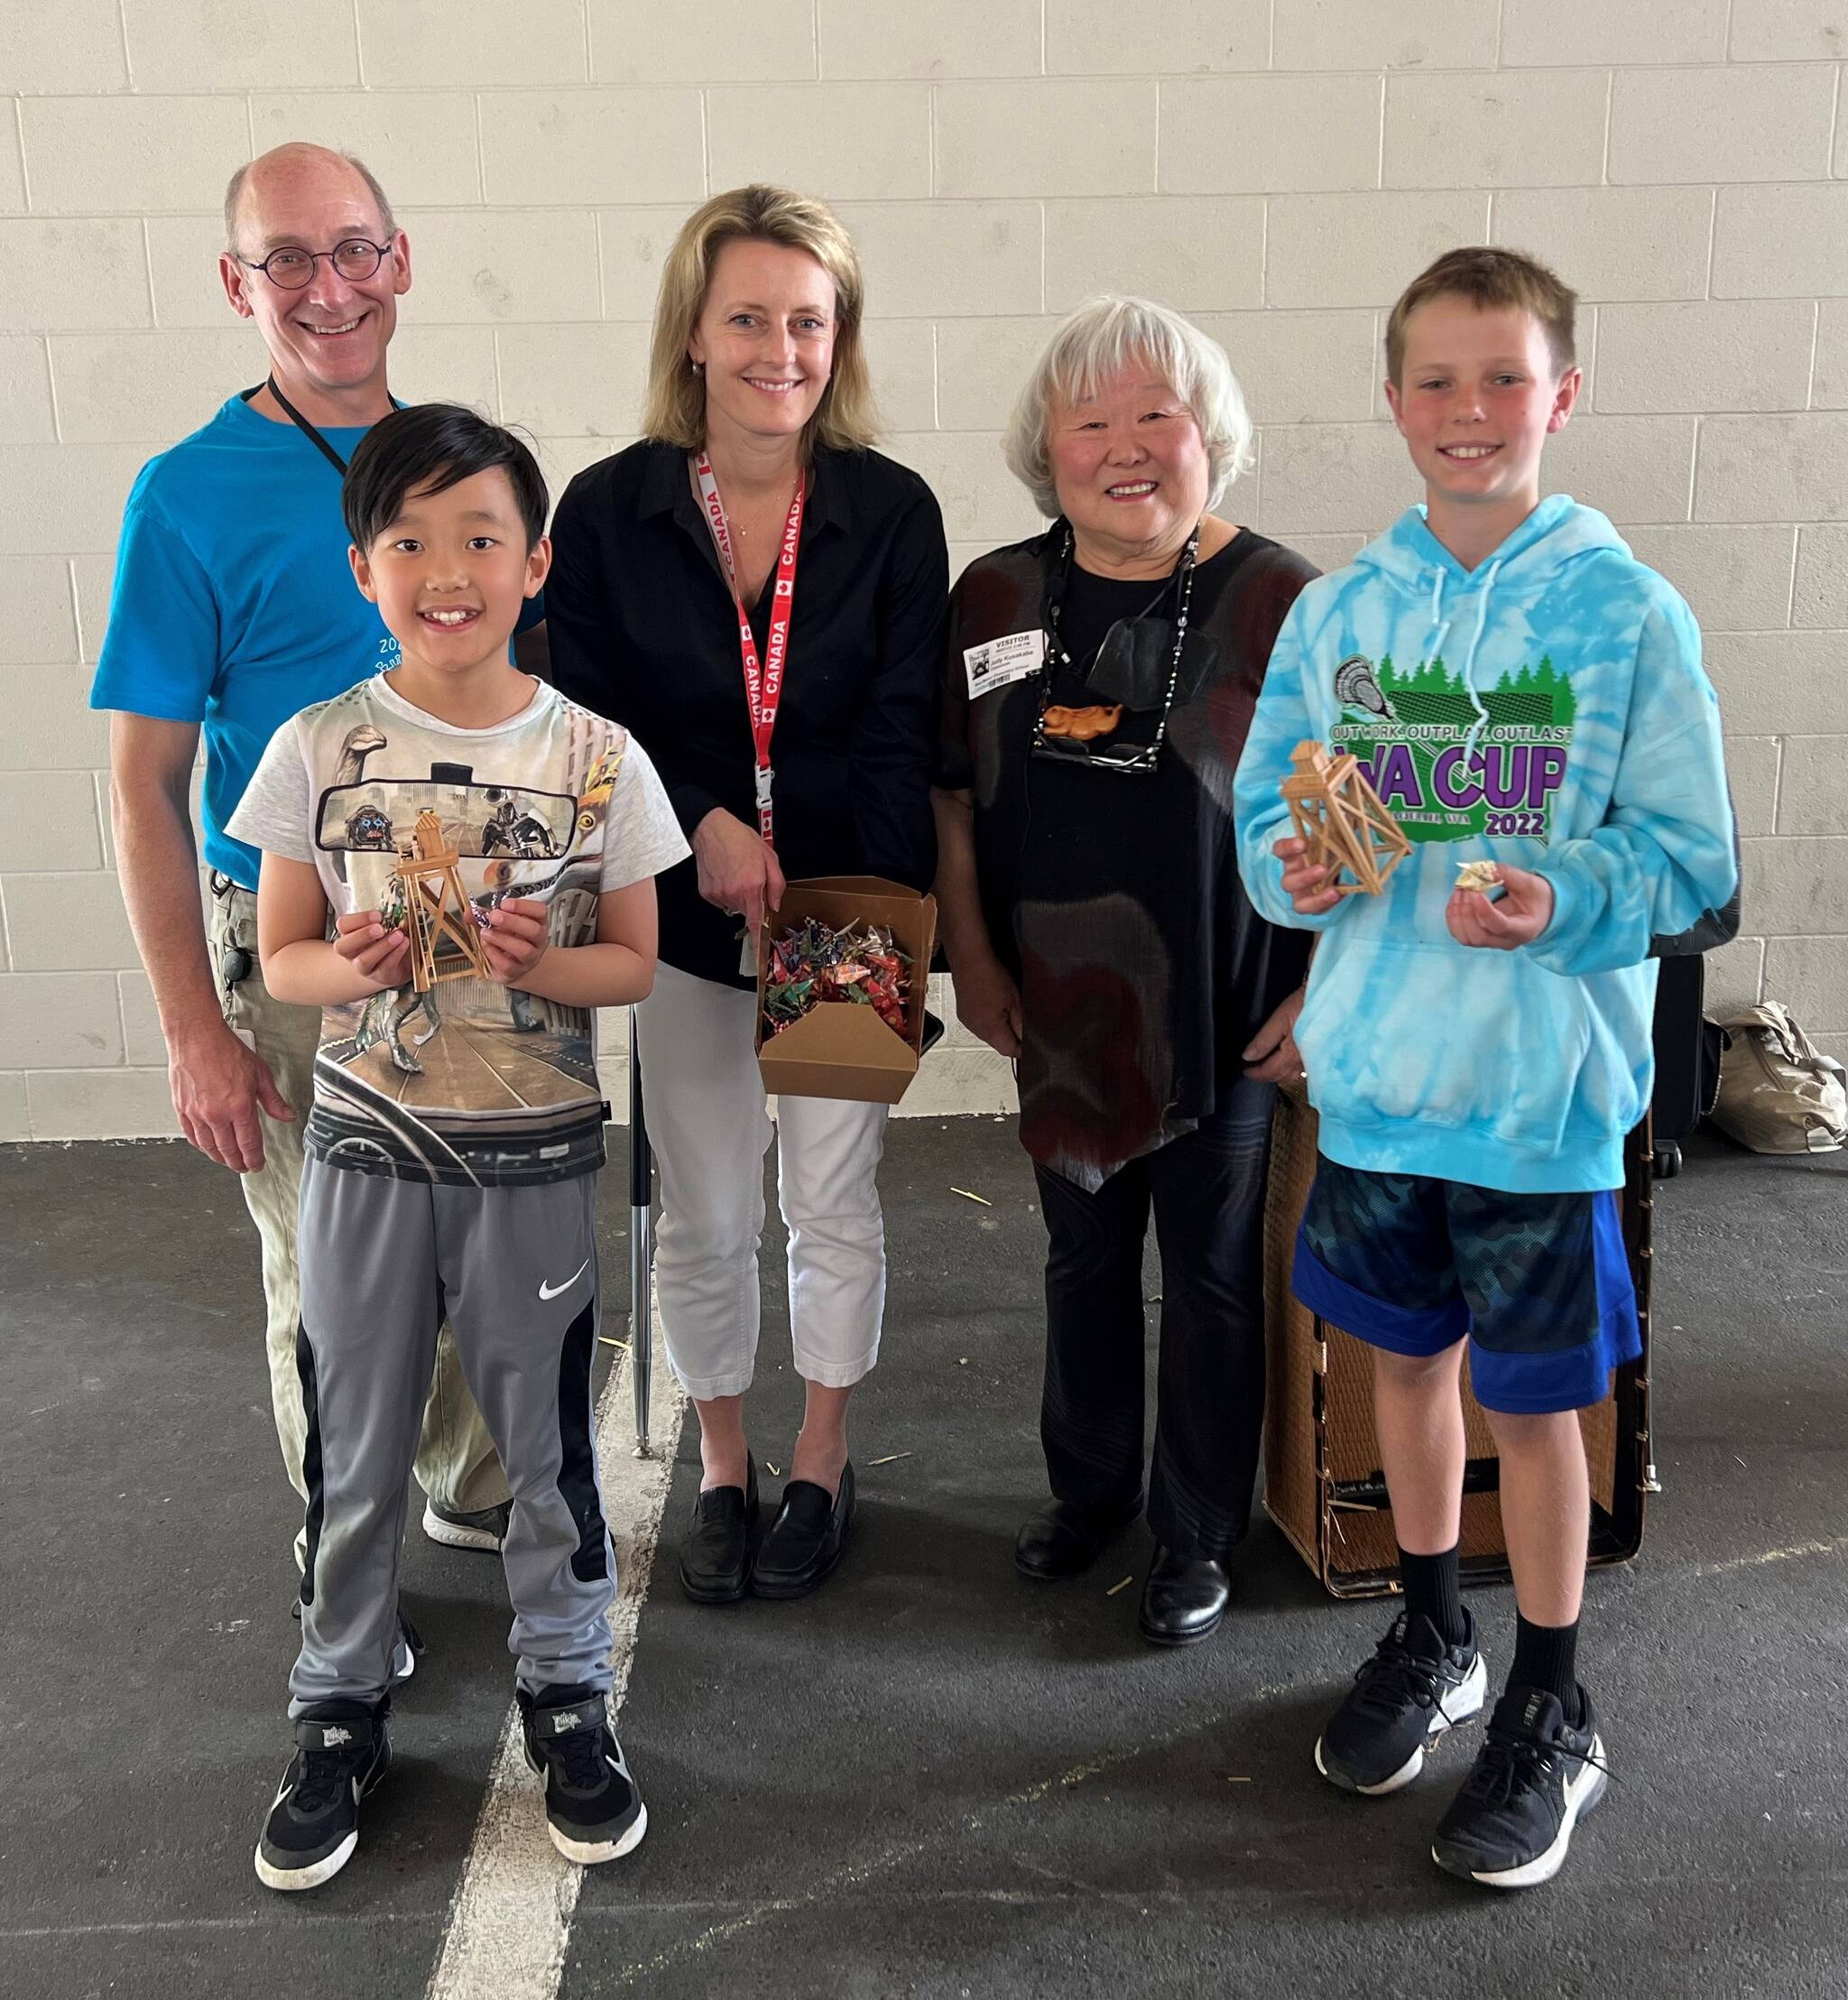 West Mercer Elementary teachers and students meeting Judy after her presentation. From left: 4th grade teacher David Baxter, 4th grade student Miles Chow, 4th grade teacher Sherry Isaacs, Judy Kusakabe, and 4th grade student Evan Manfredo. Photos by Soyun Chow